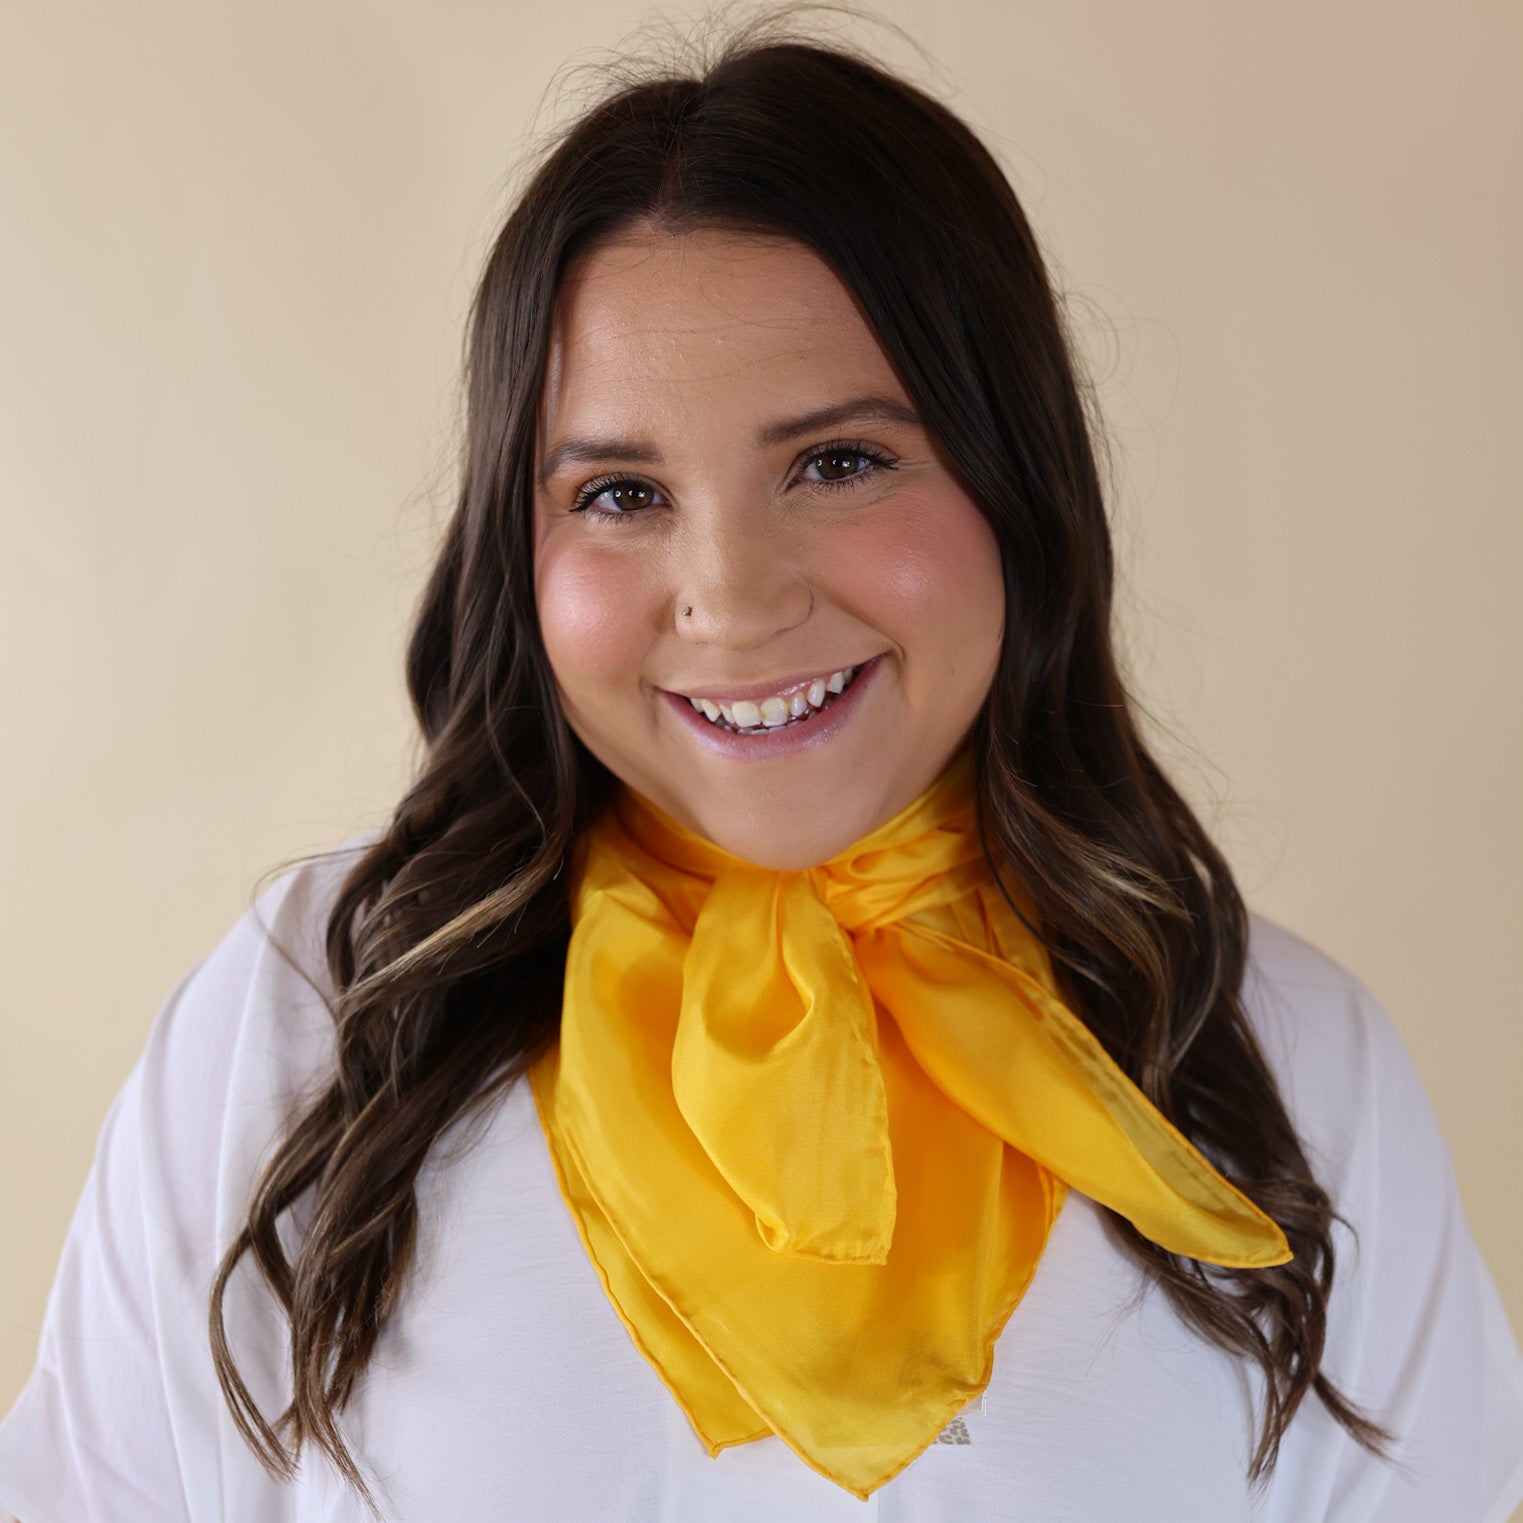 Brunette model wearing a white, drop shoulder top with solid yellow scarf tied around her neck. Model is pictured in front of a beige background.